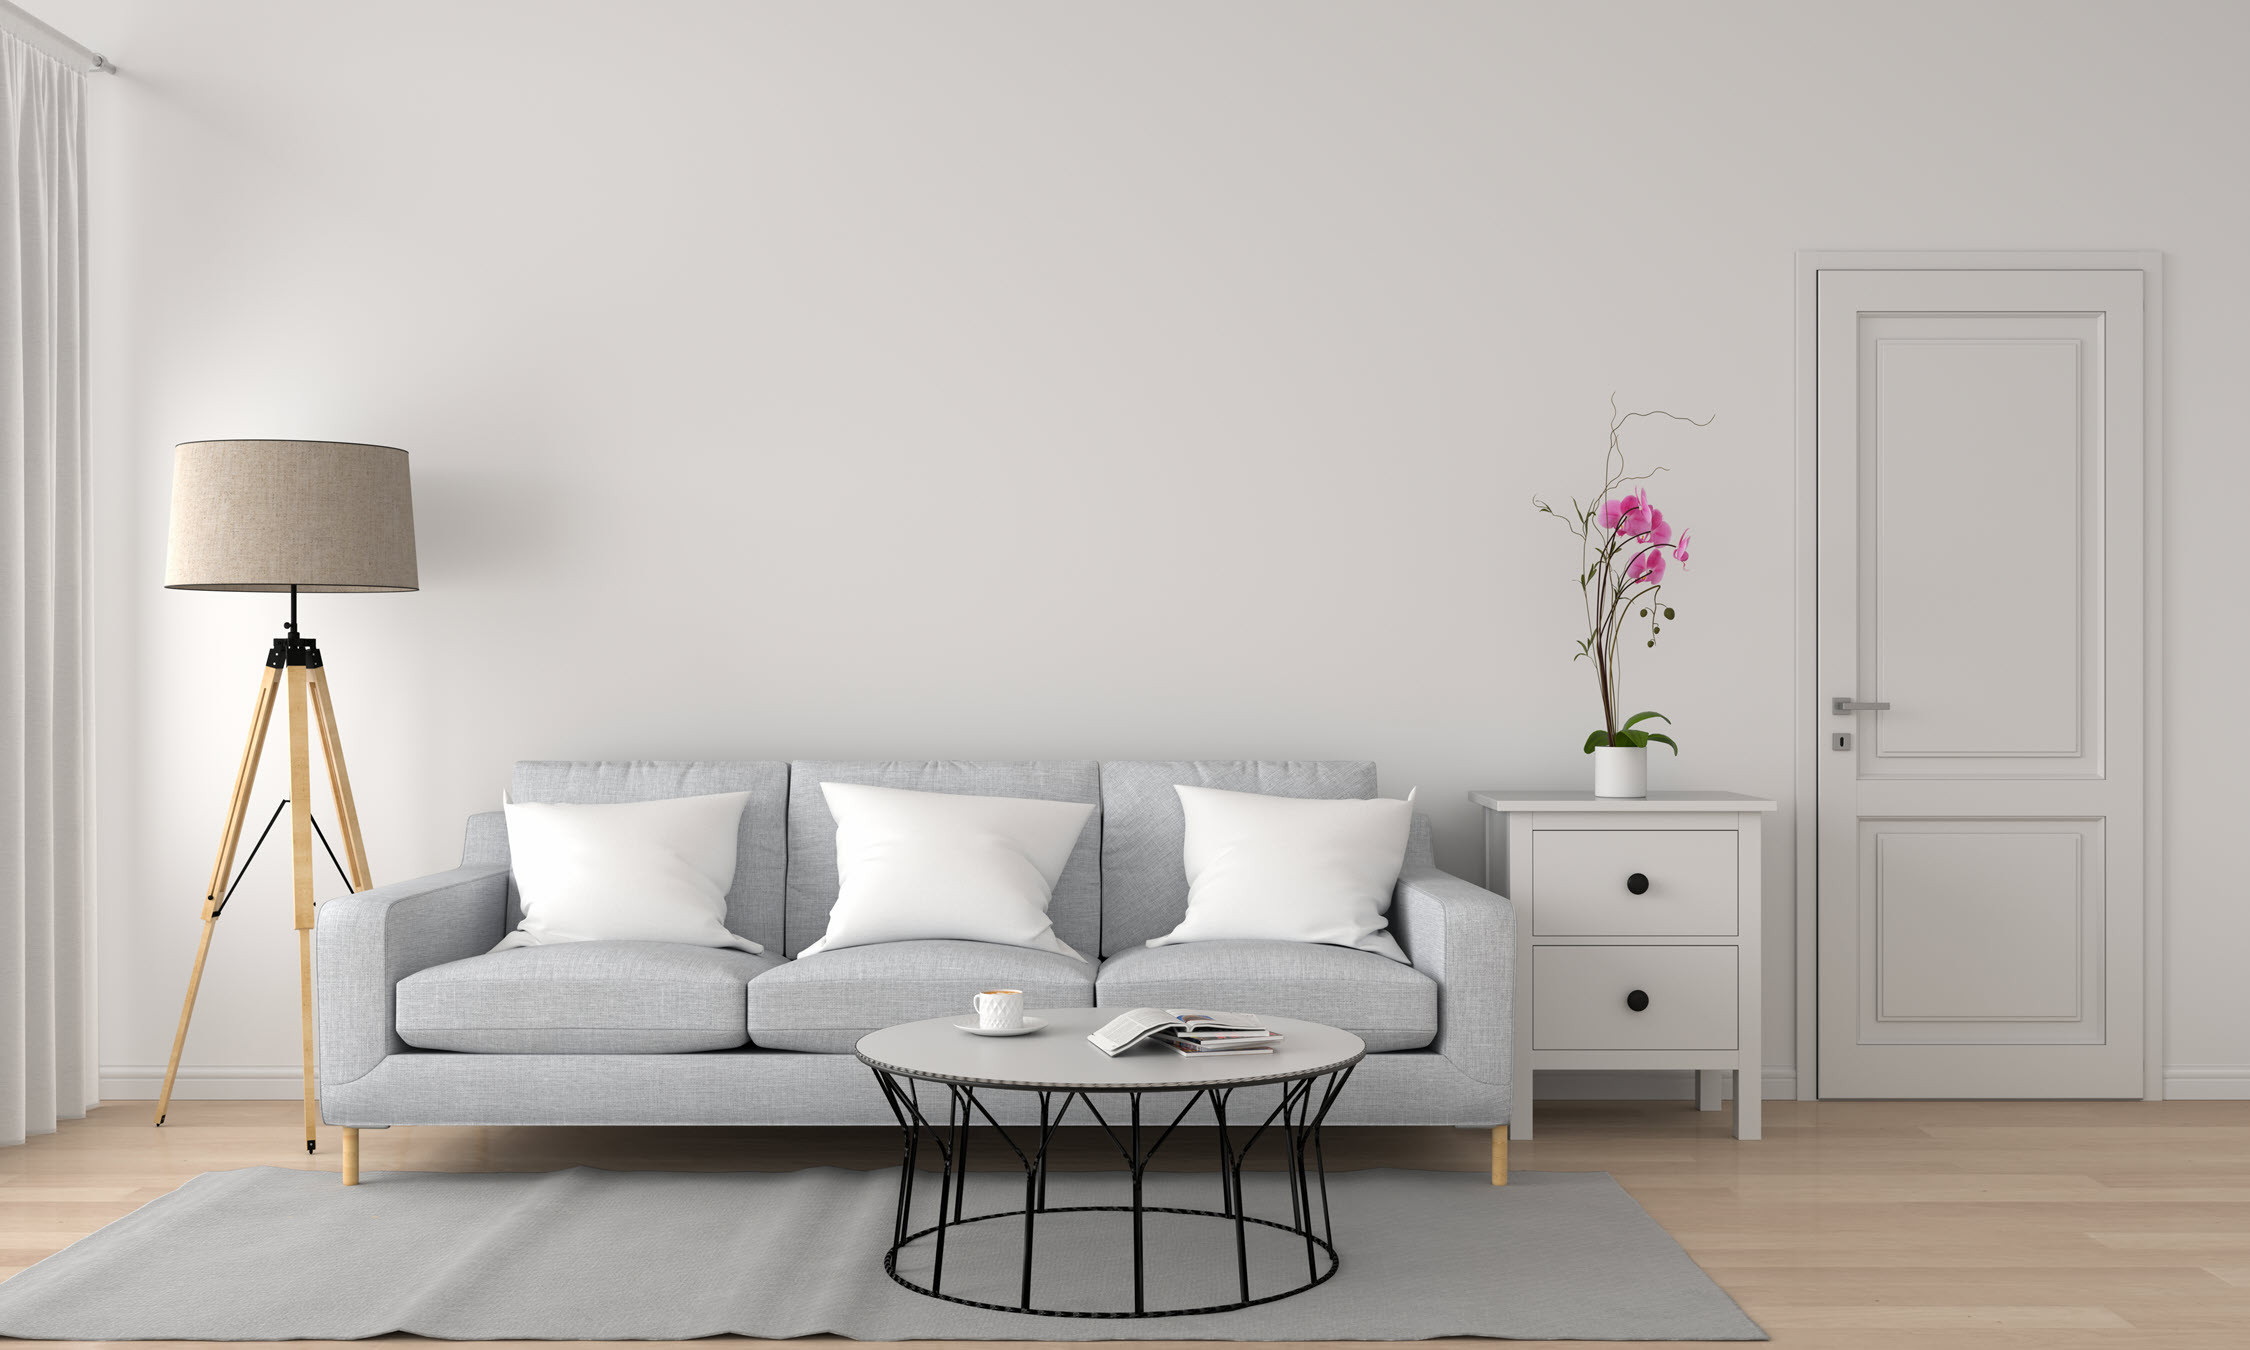 Minimalist Living Room Furniture
 How To Easily Create The Perfect Minimalist Living Room